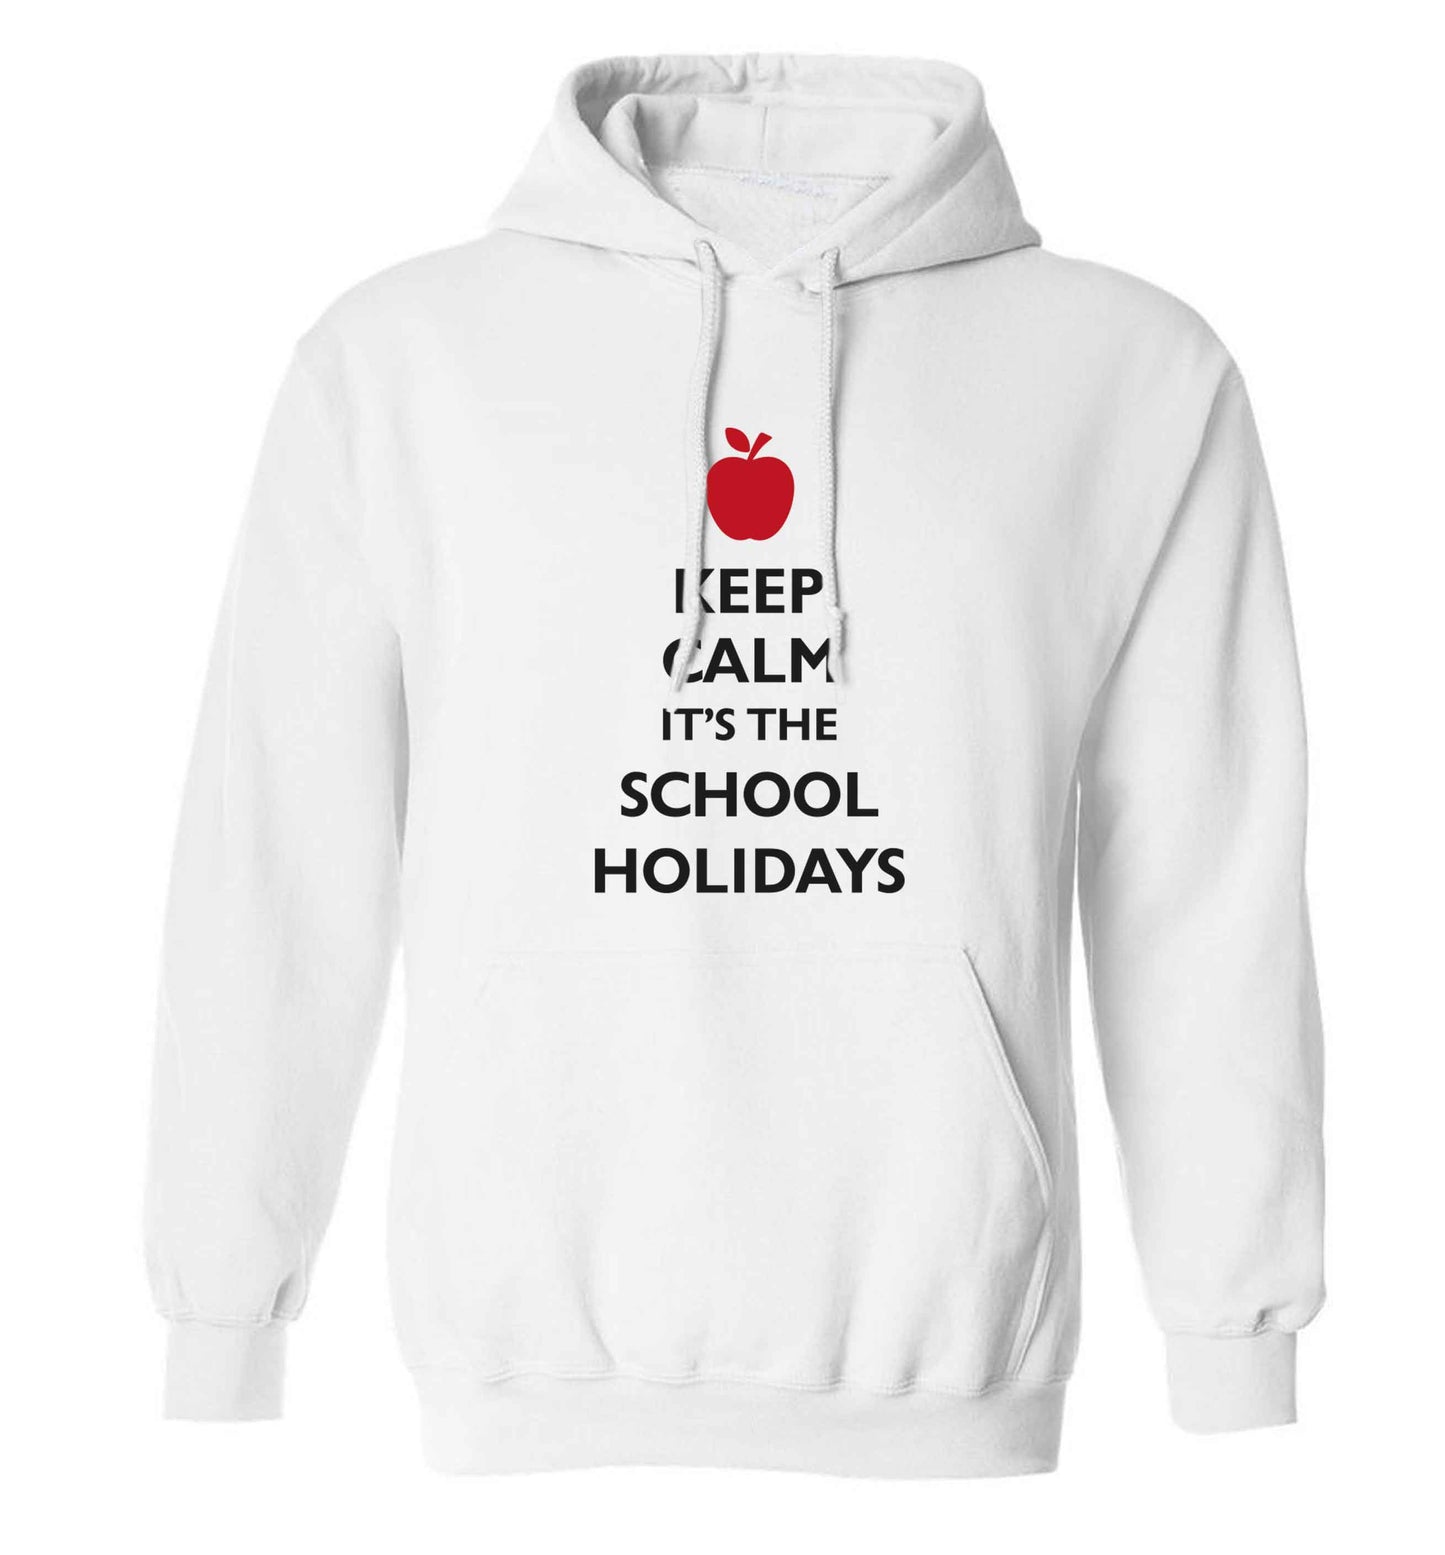 Keep calm it's the school holidays adults unisex white hoodie 2XL